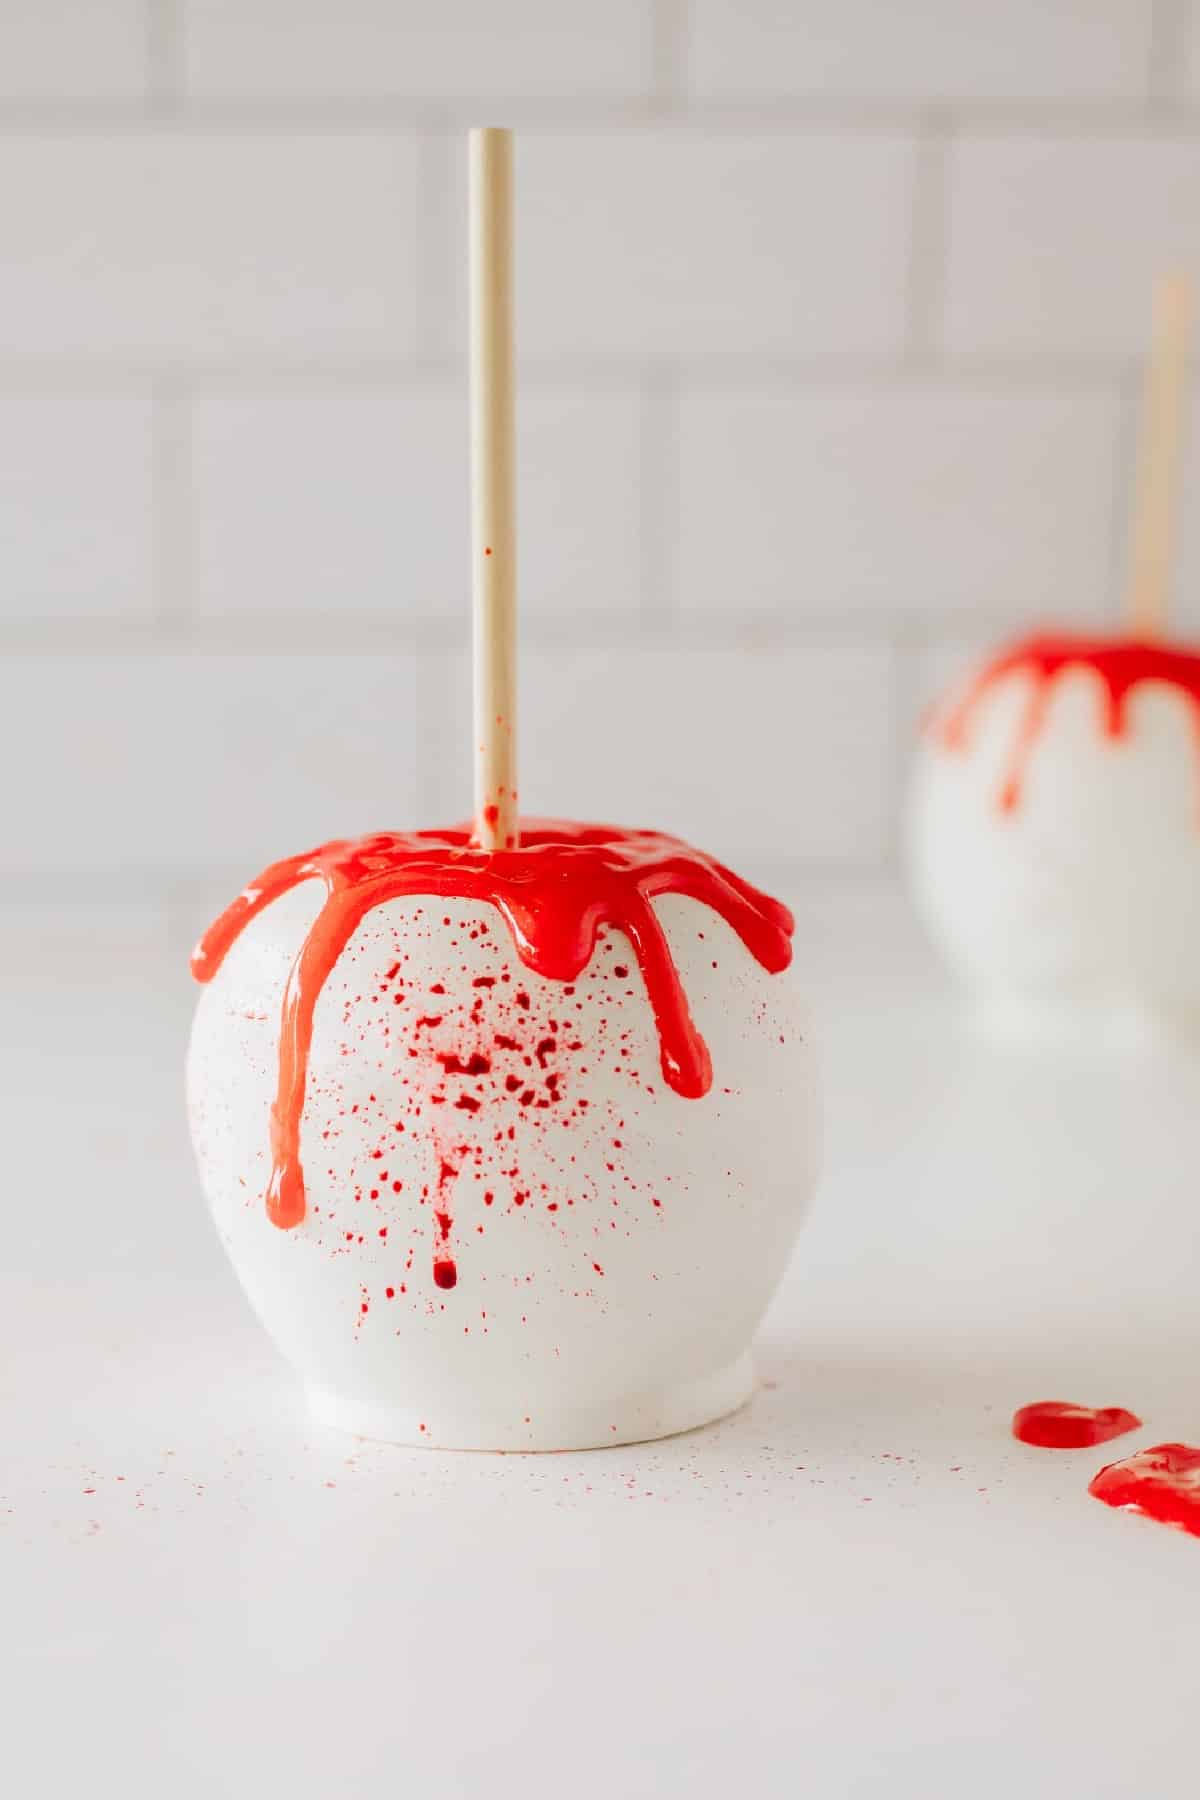 A granny smith apple with a dipping stick dipped in white chocolate and splattered with red edible blood. 